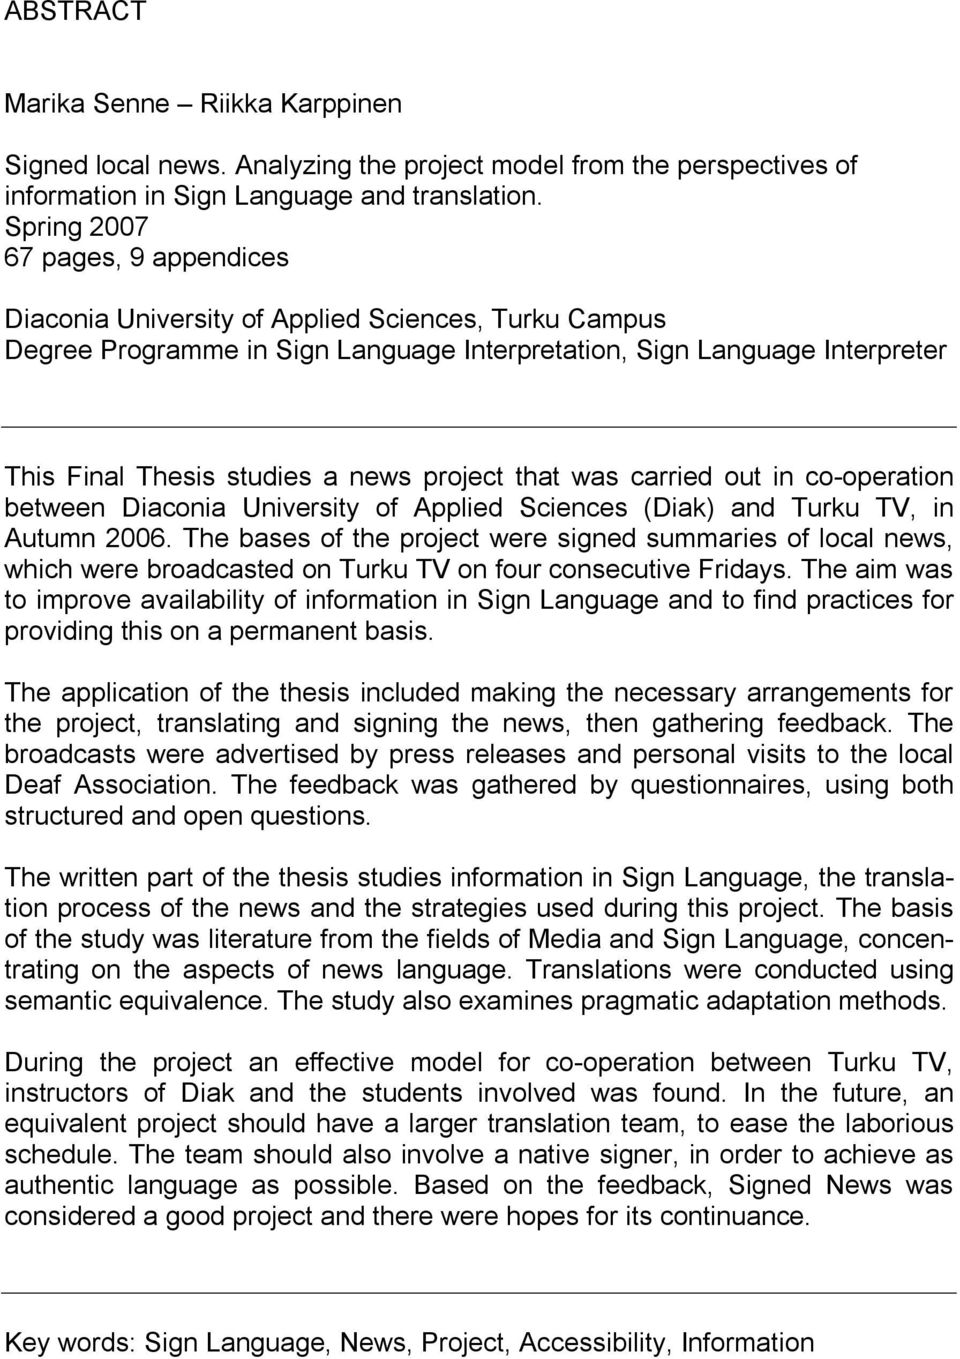 project that was carried out in co operation between Diaconia University of Applied Sciences (Diak) and Turku TV, in Autumn 2006.